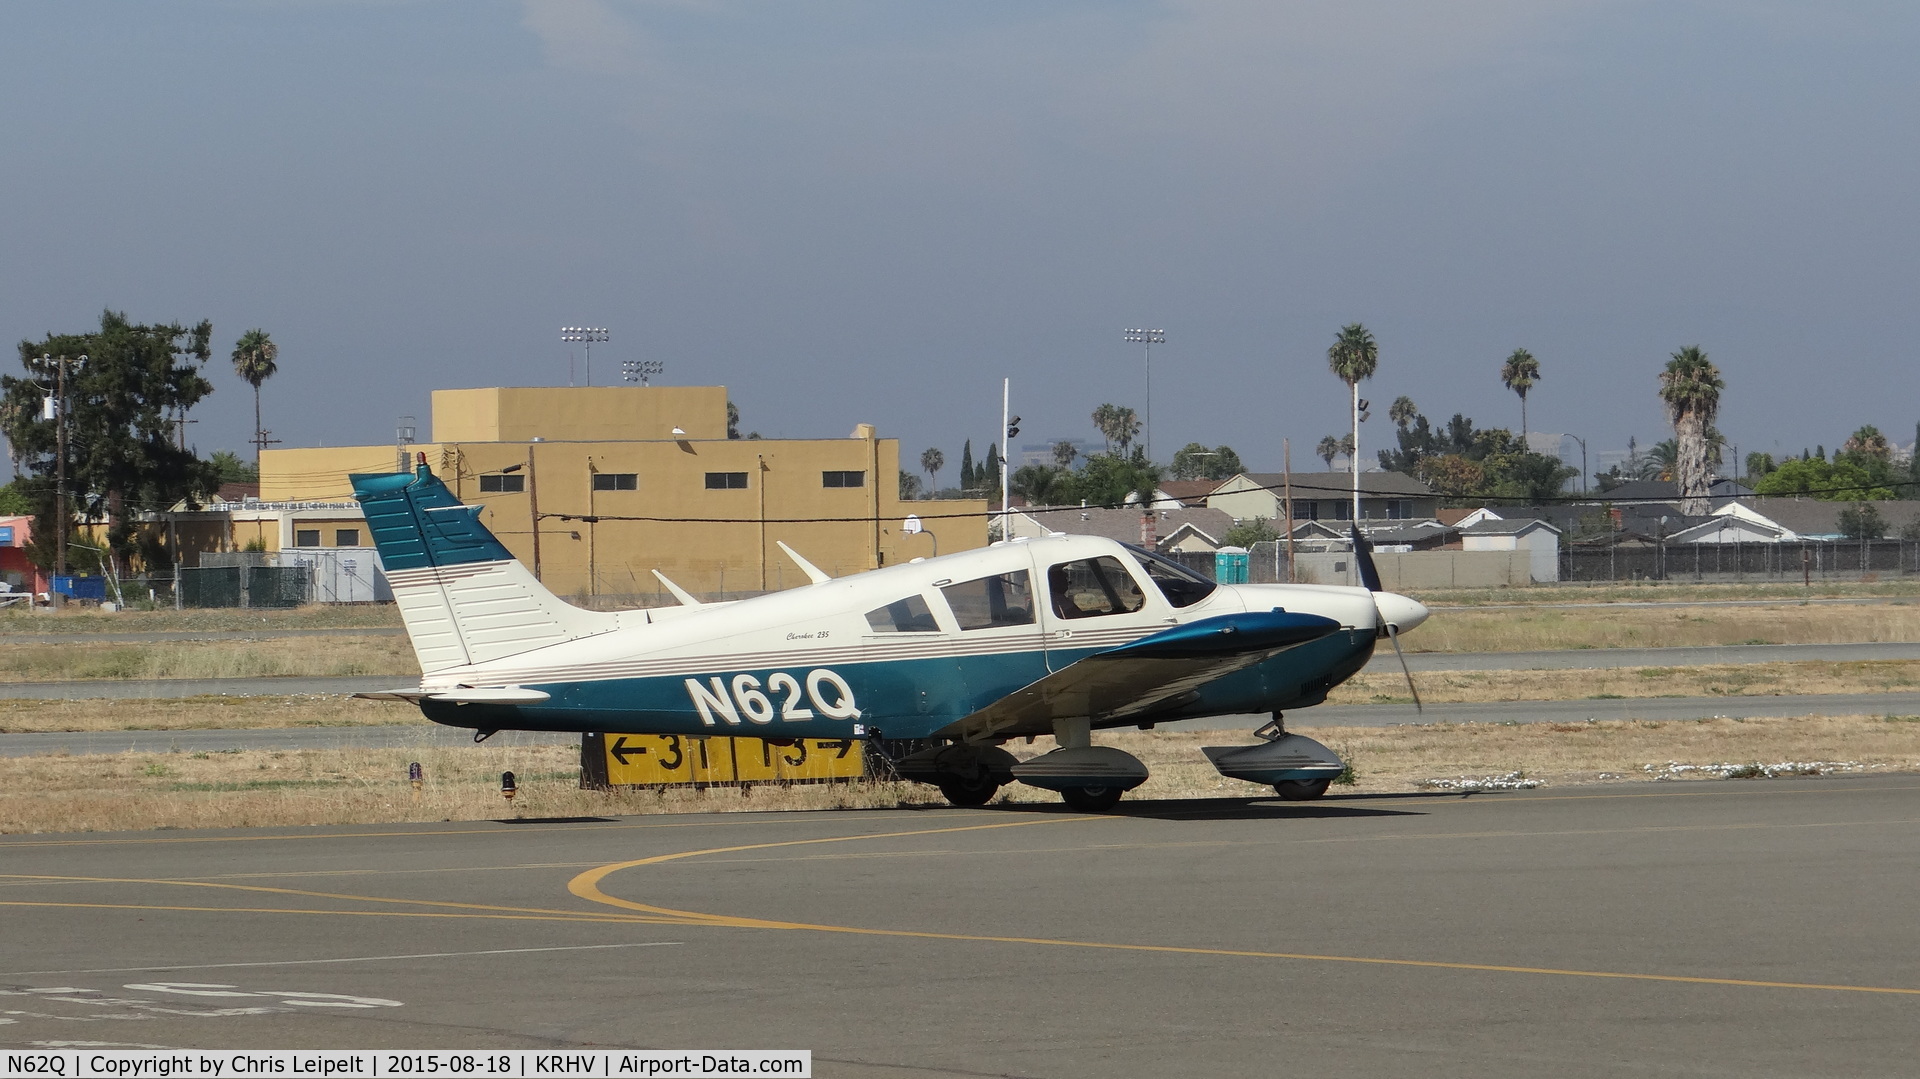 N62Q, 1972 Piper PA-28-235 Cherokee C/N 28-7210011, California-based 1972 Piper PA-28-235 taxing to the transient ramp after landing at Reid Hillview Airport, San Jose, CA.